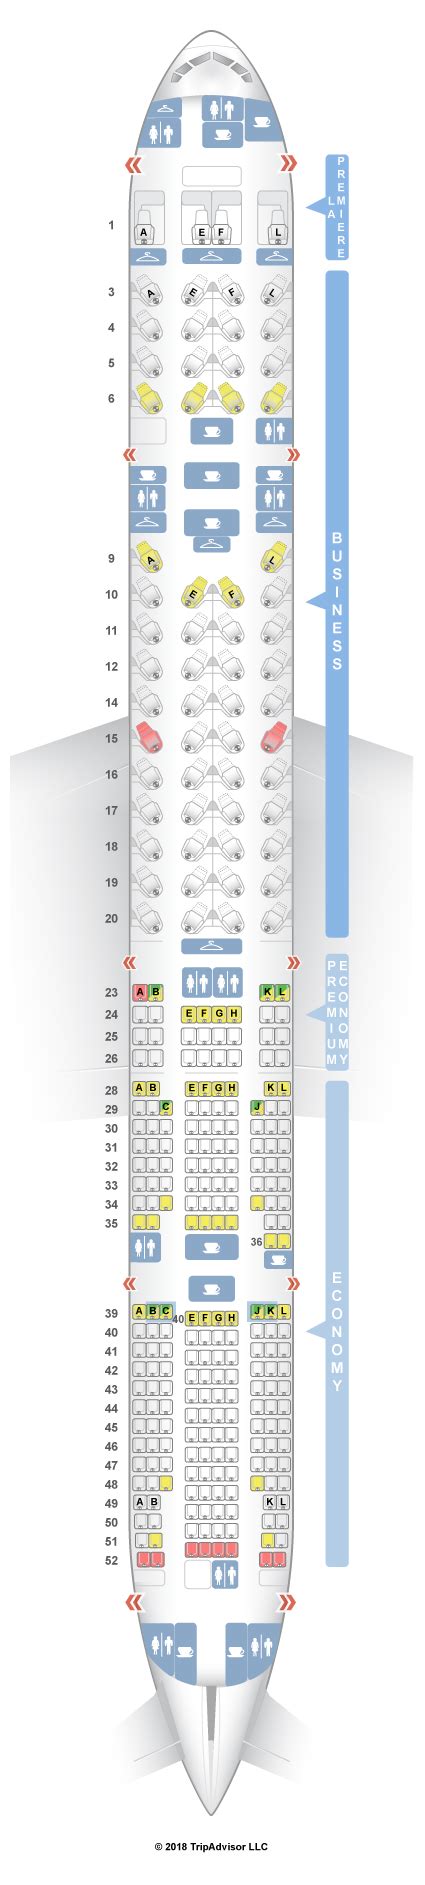 Air France Er Seat Map Maps Database Source